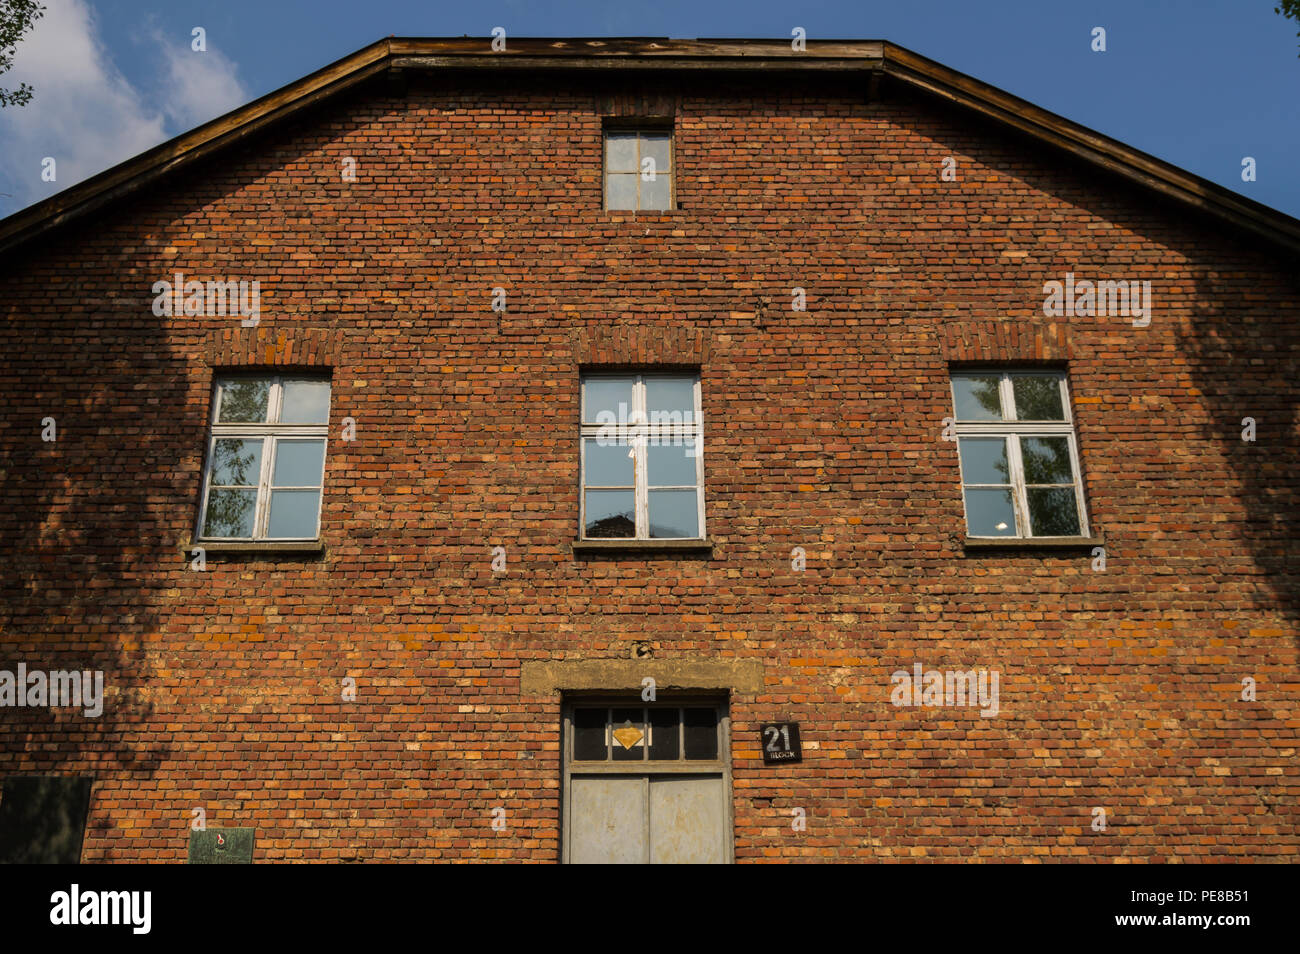 Main facade of block 21 located in Auschwitz, nazi concentration camp in Oswiecim, Poland. Building used by Doctor Mengele to experiment with people. Stock Photo